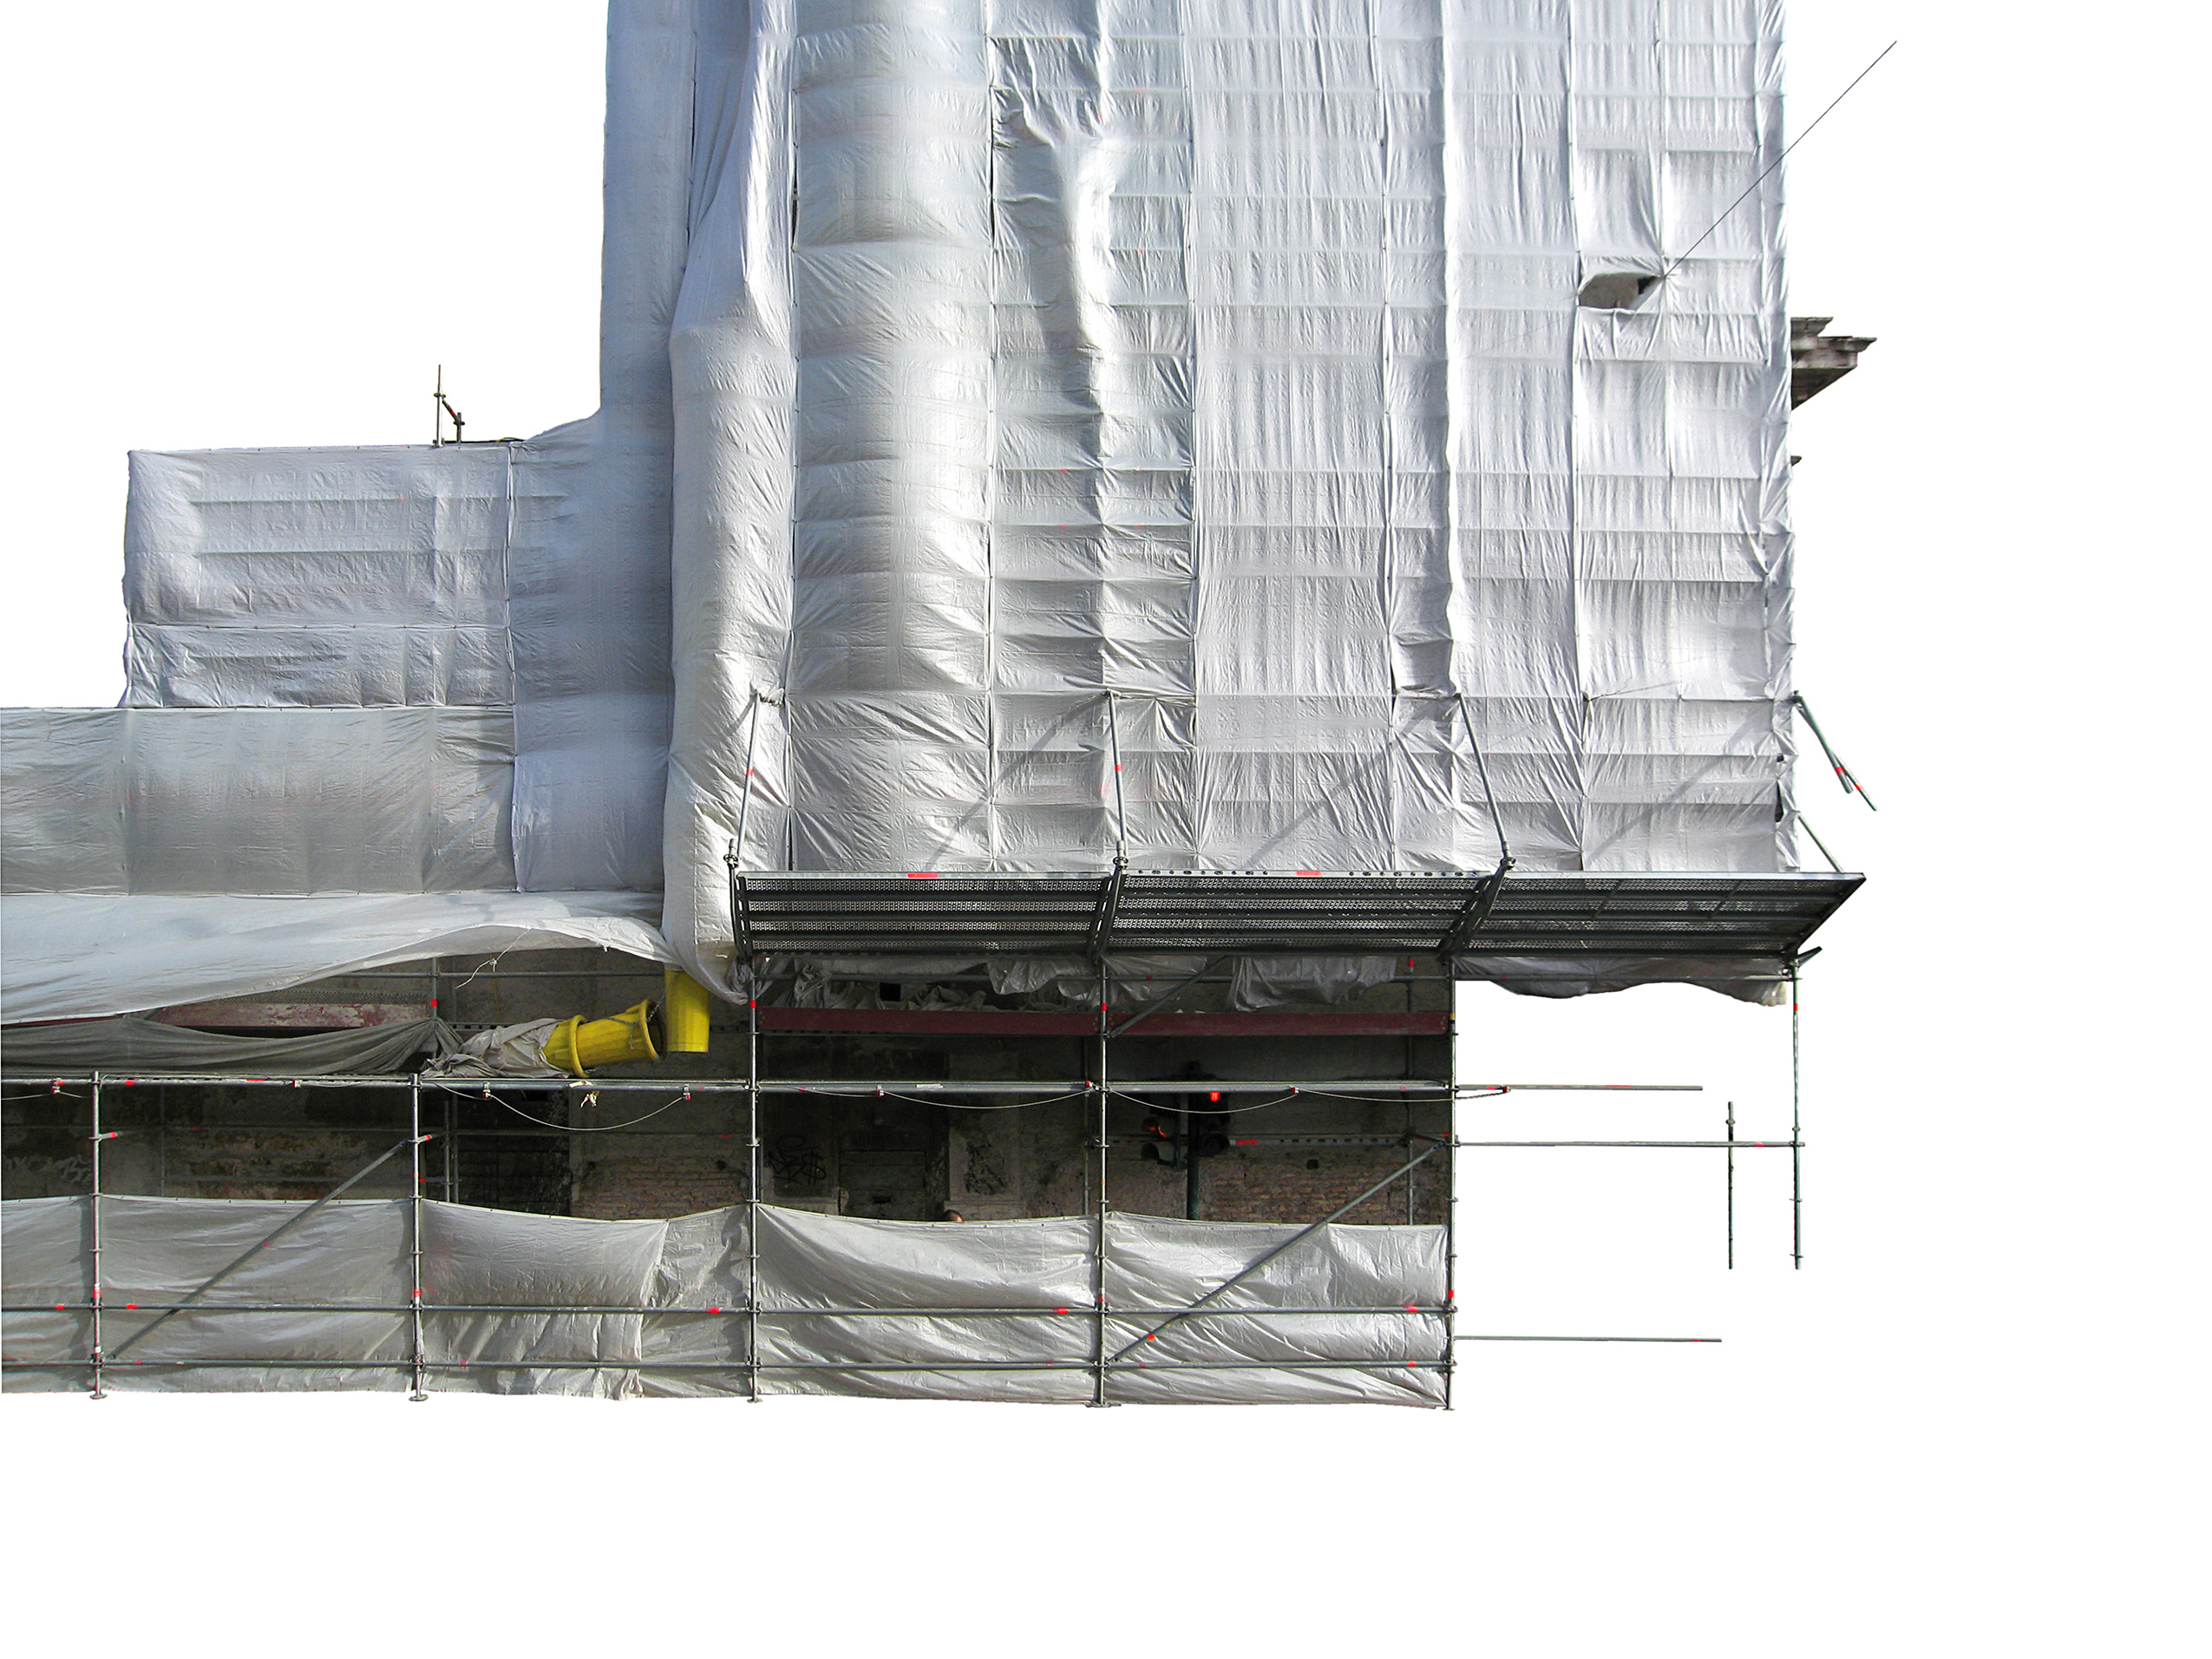 Image of a wrapped builded.